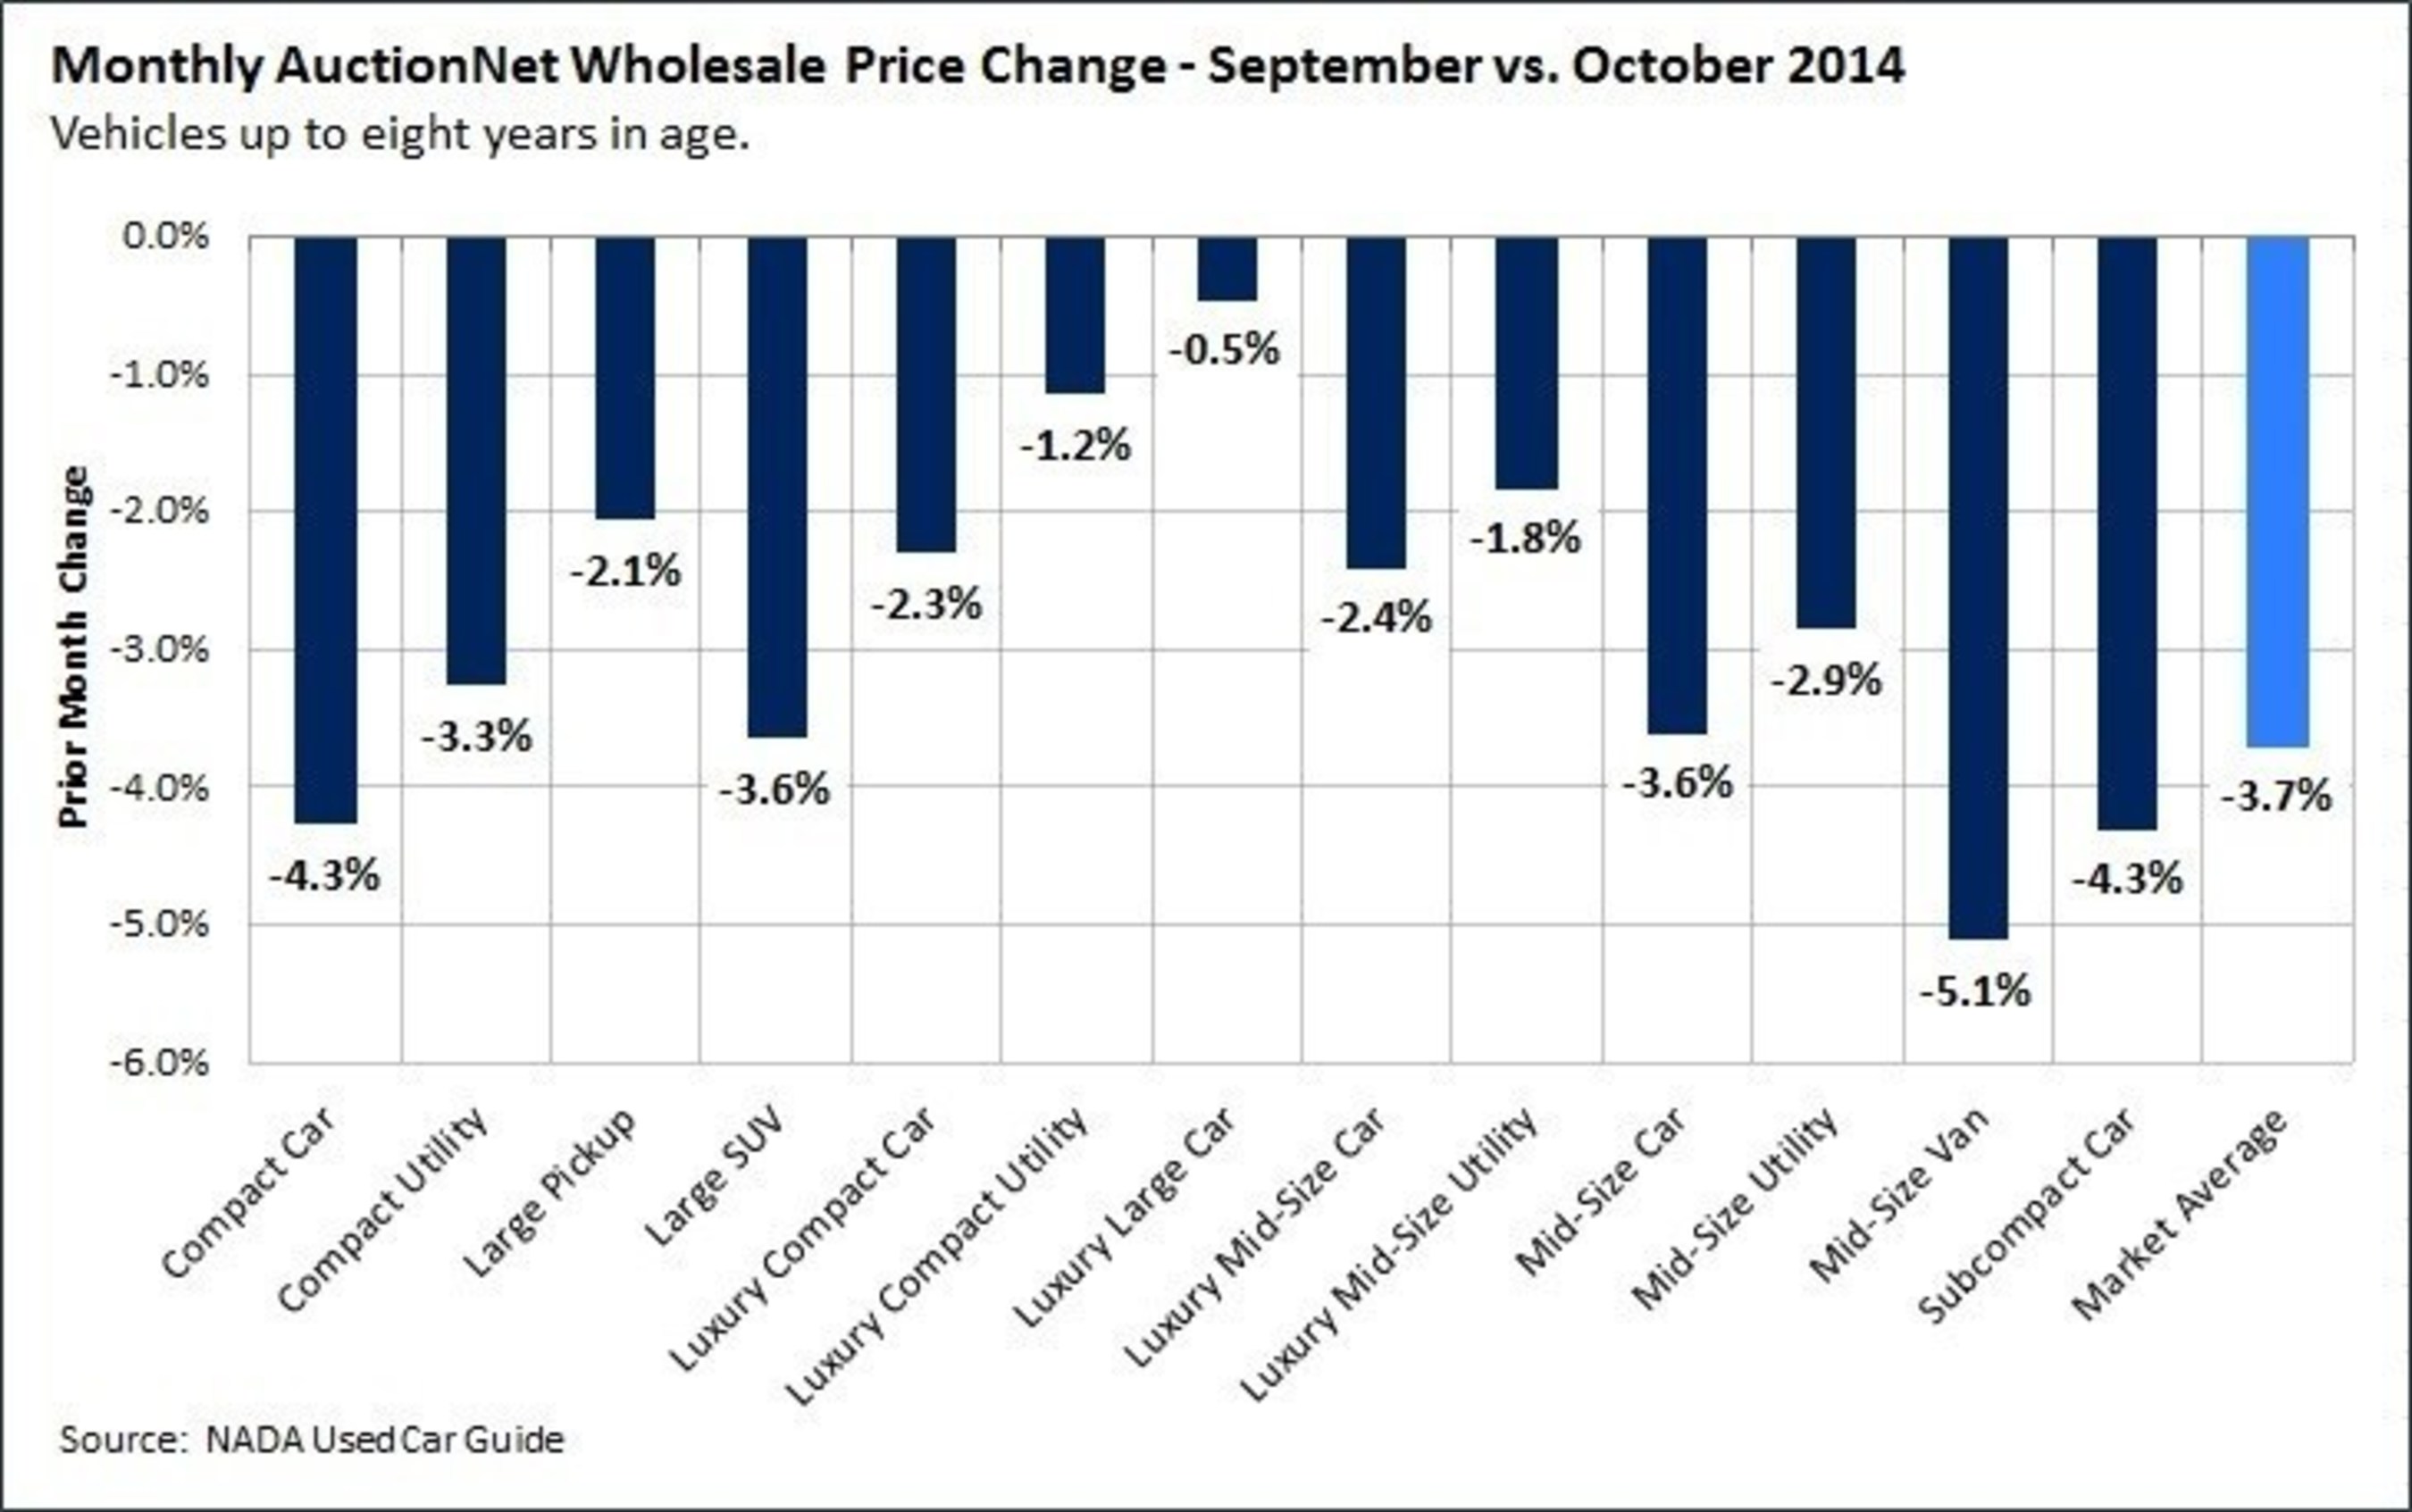 Wholesale prices fell by 3.7 percent in October. The month's showing was the fourth month in a row with depreciation at or above 3 percent.